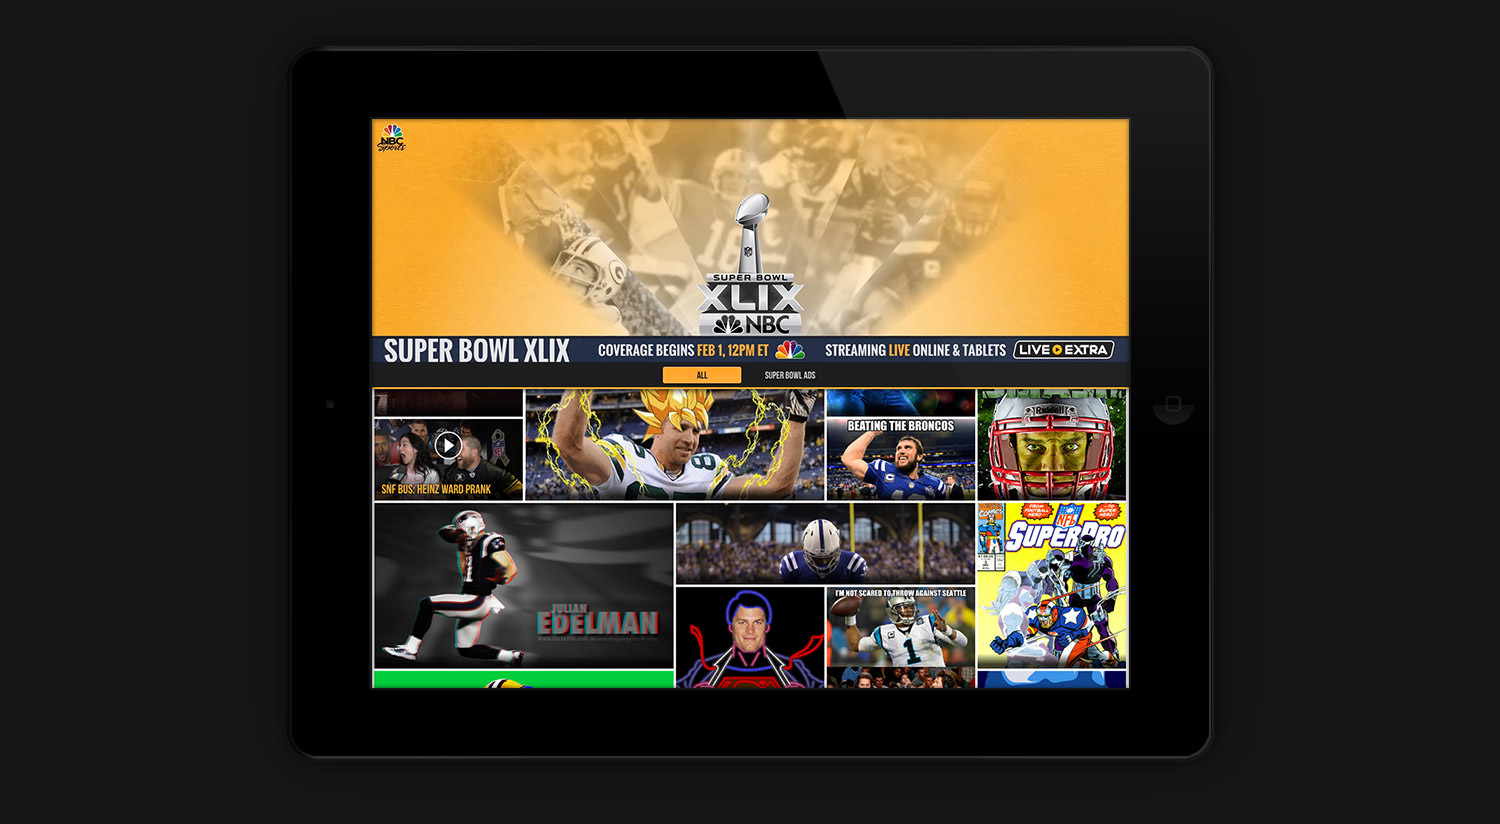 The NBC Sports Super Bowl site displayed on a tablet